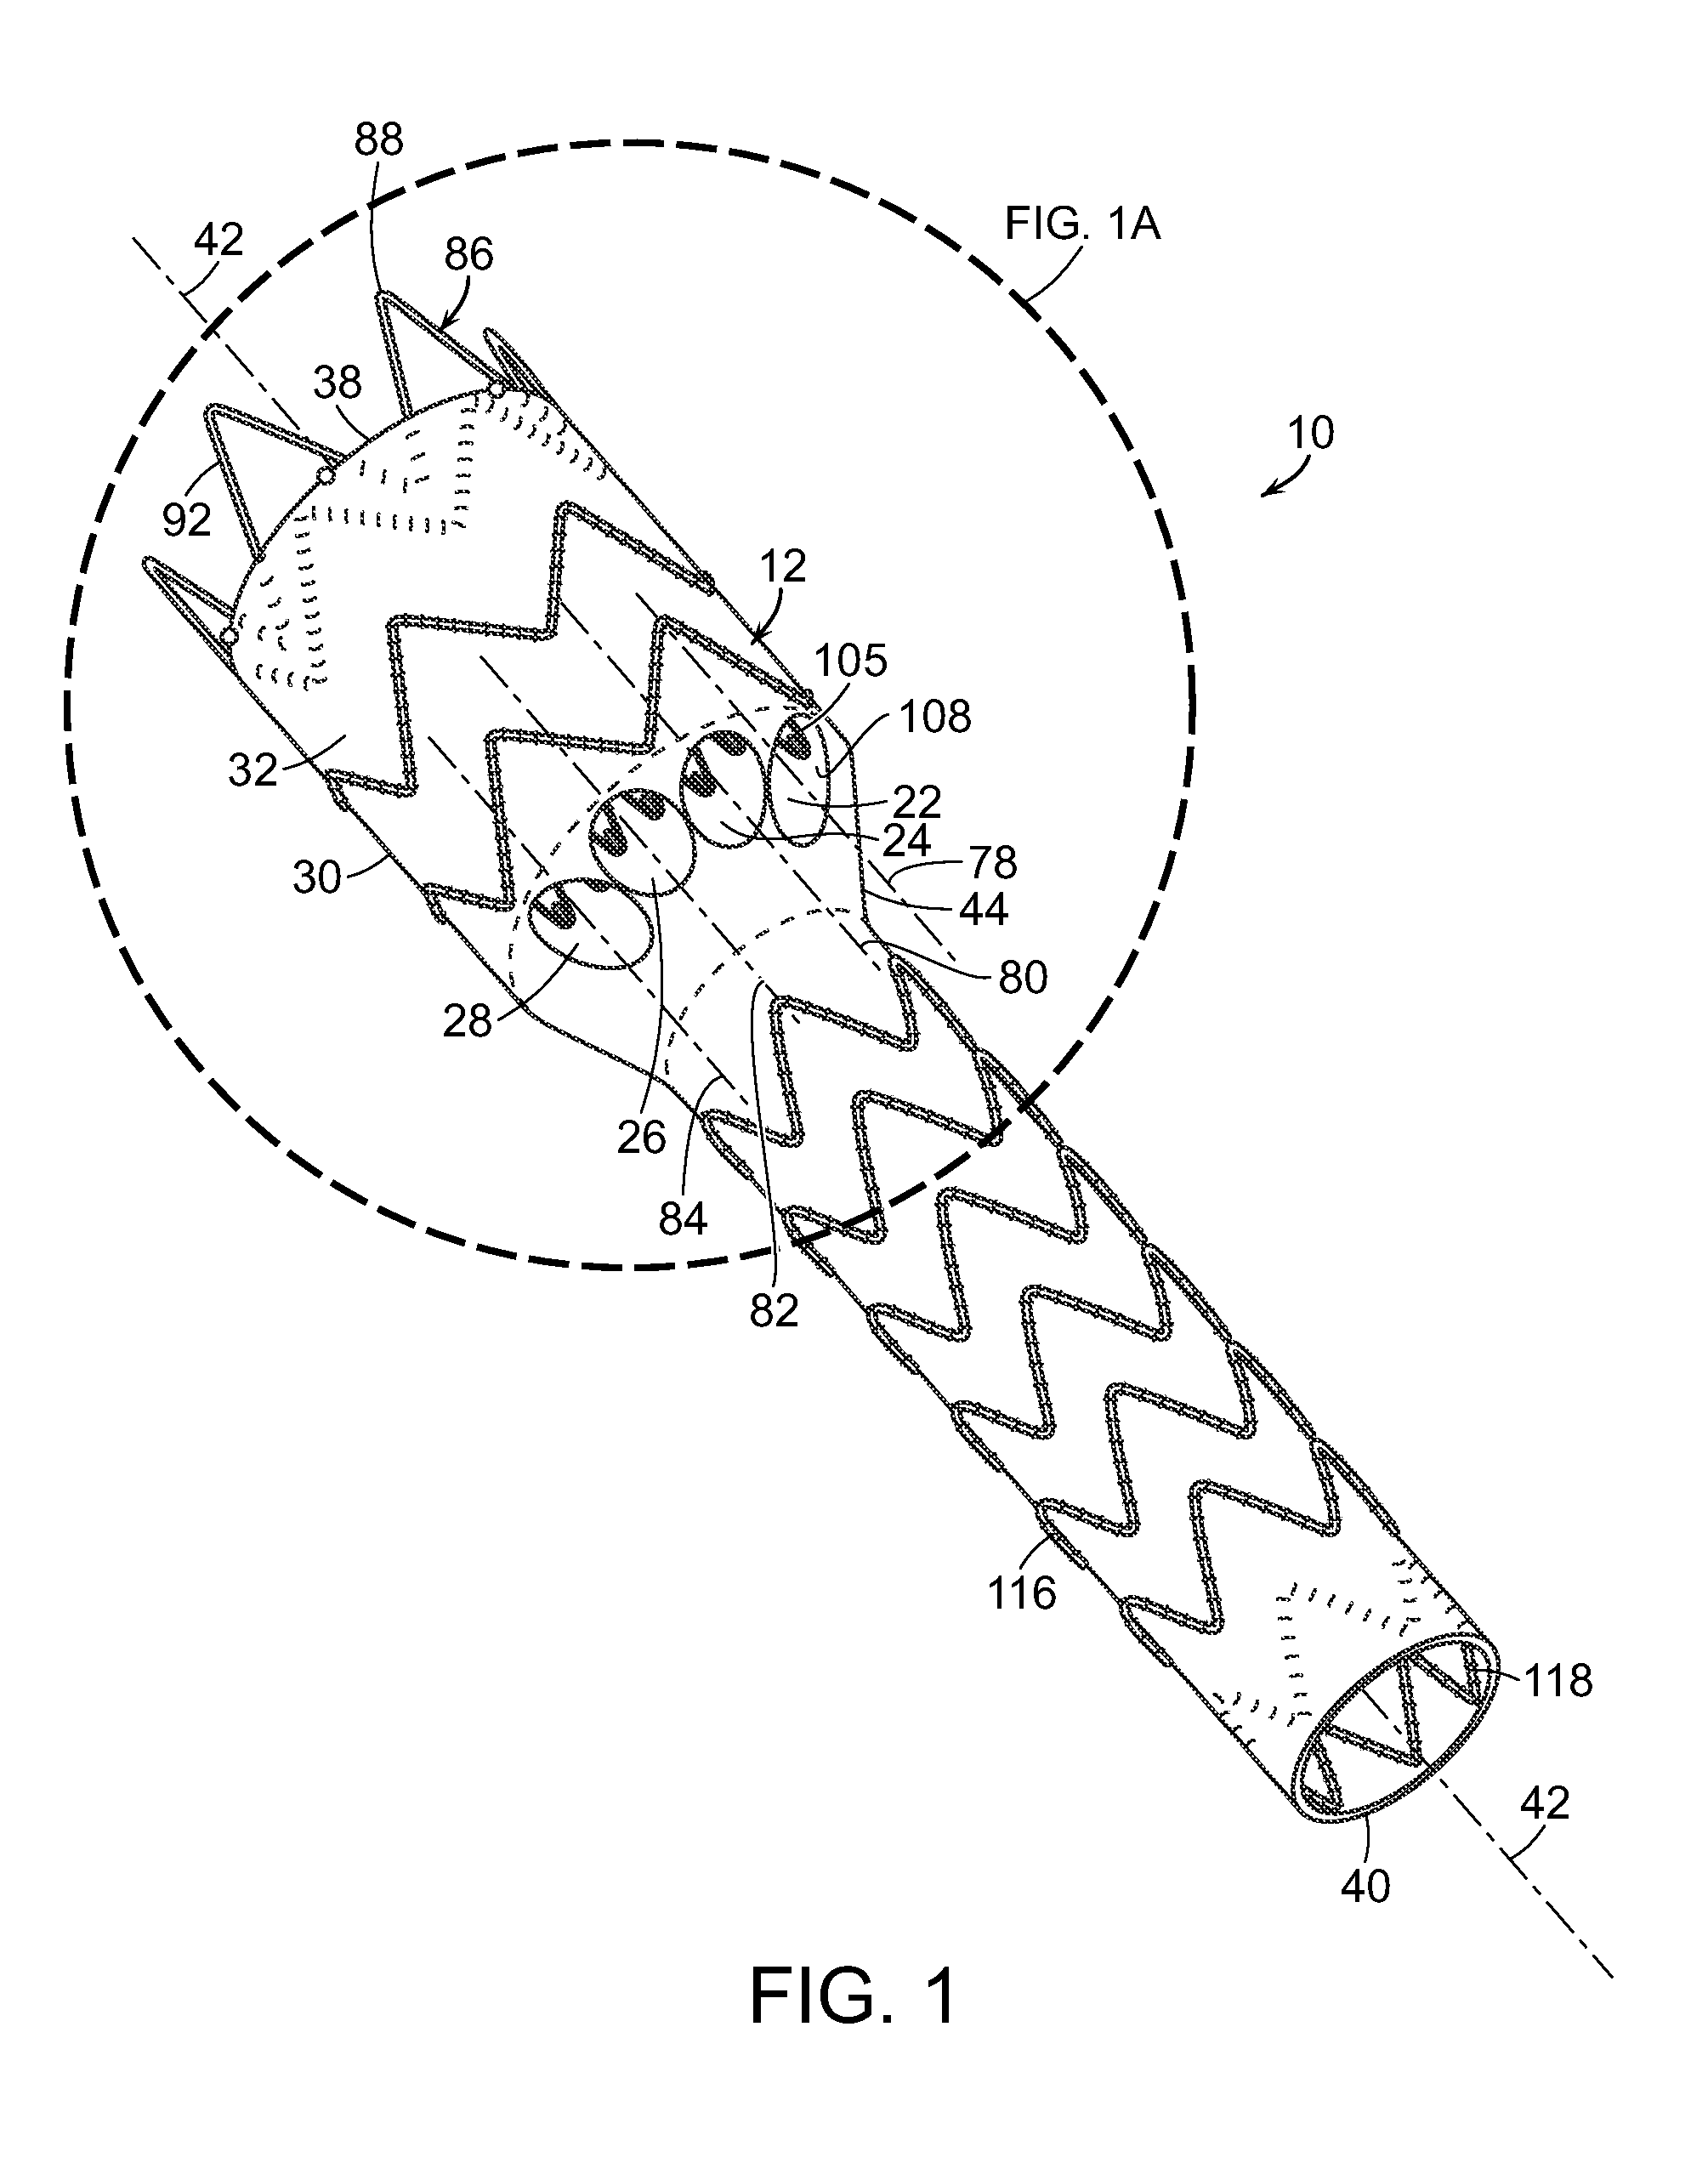 Vascular repair devices and methods of use